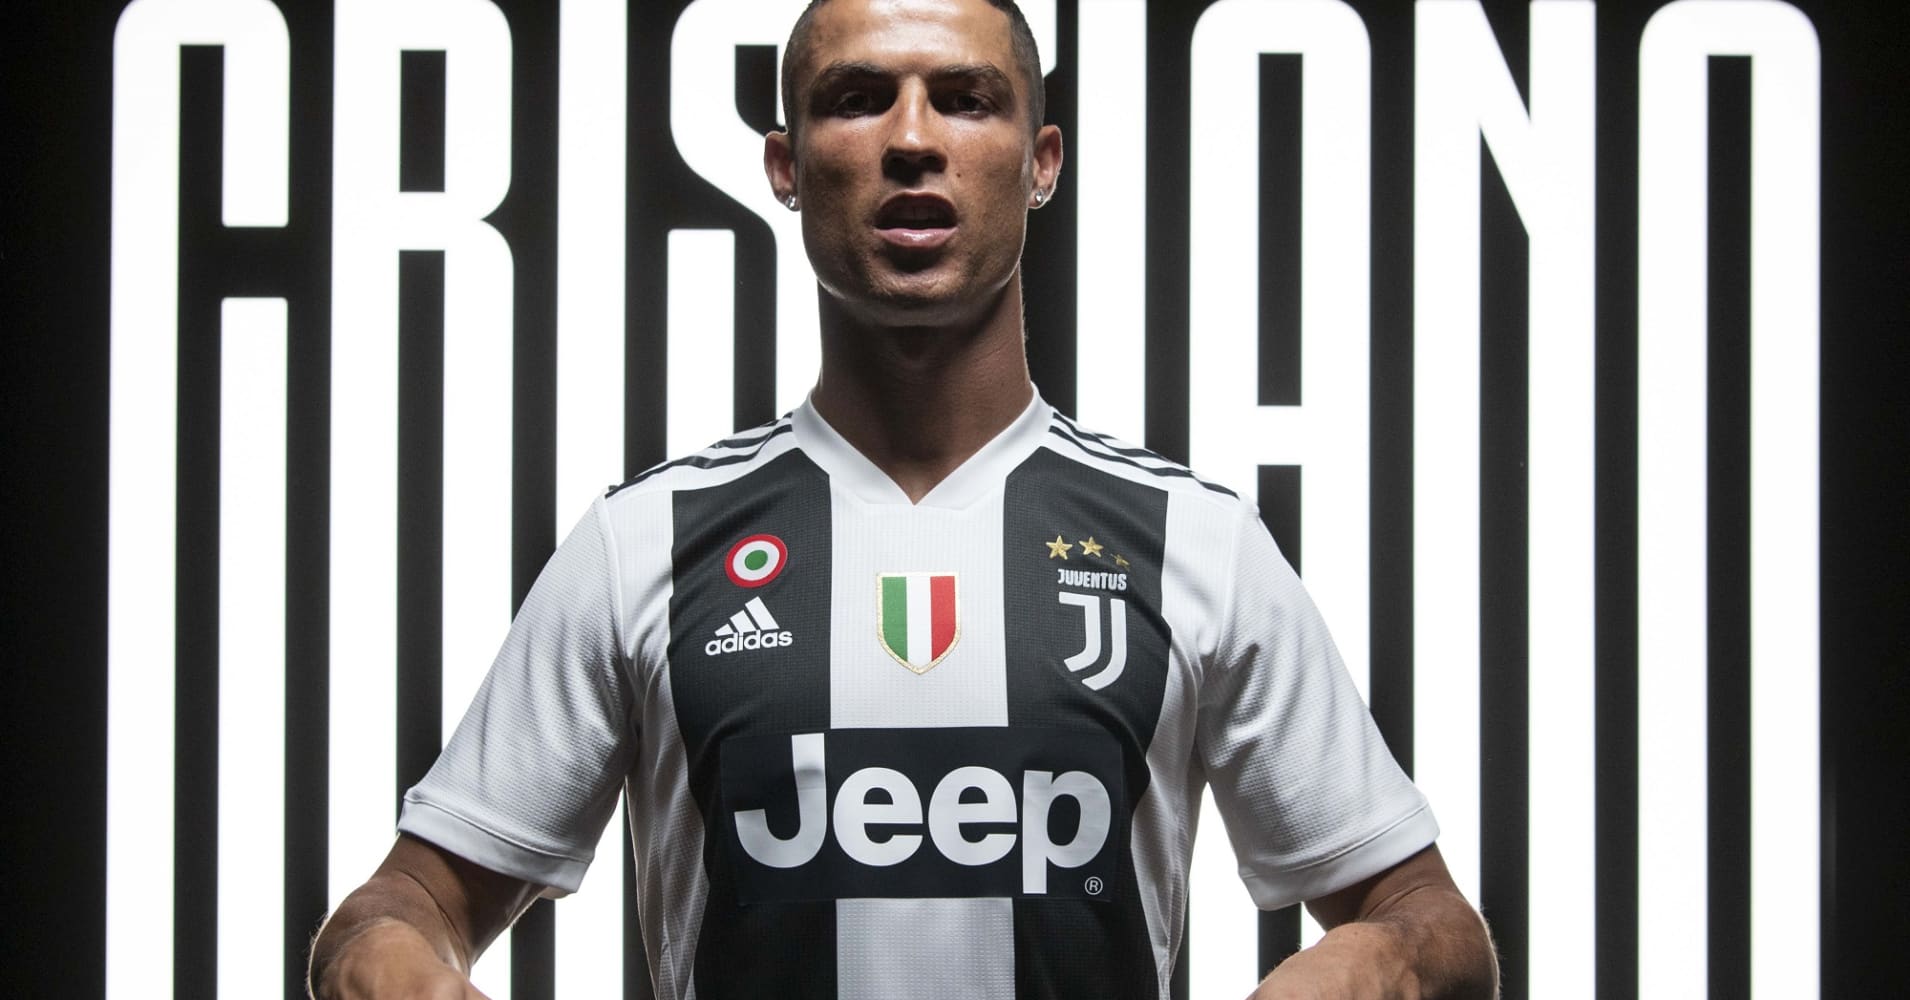 Juventus sold over $60 million of Ronaldo jerseys in just one day